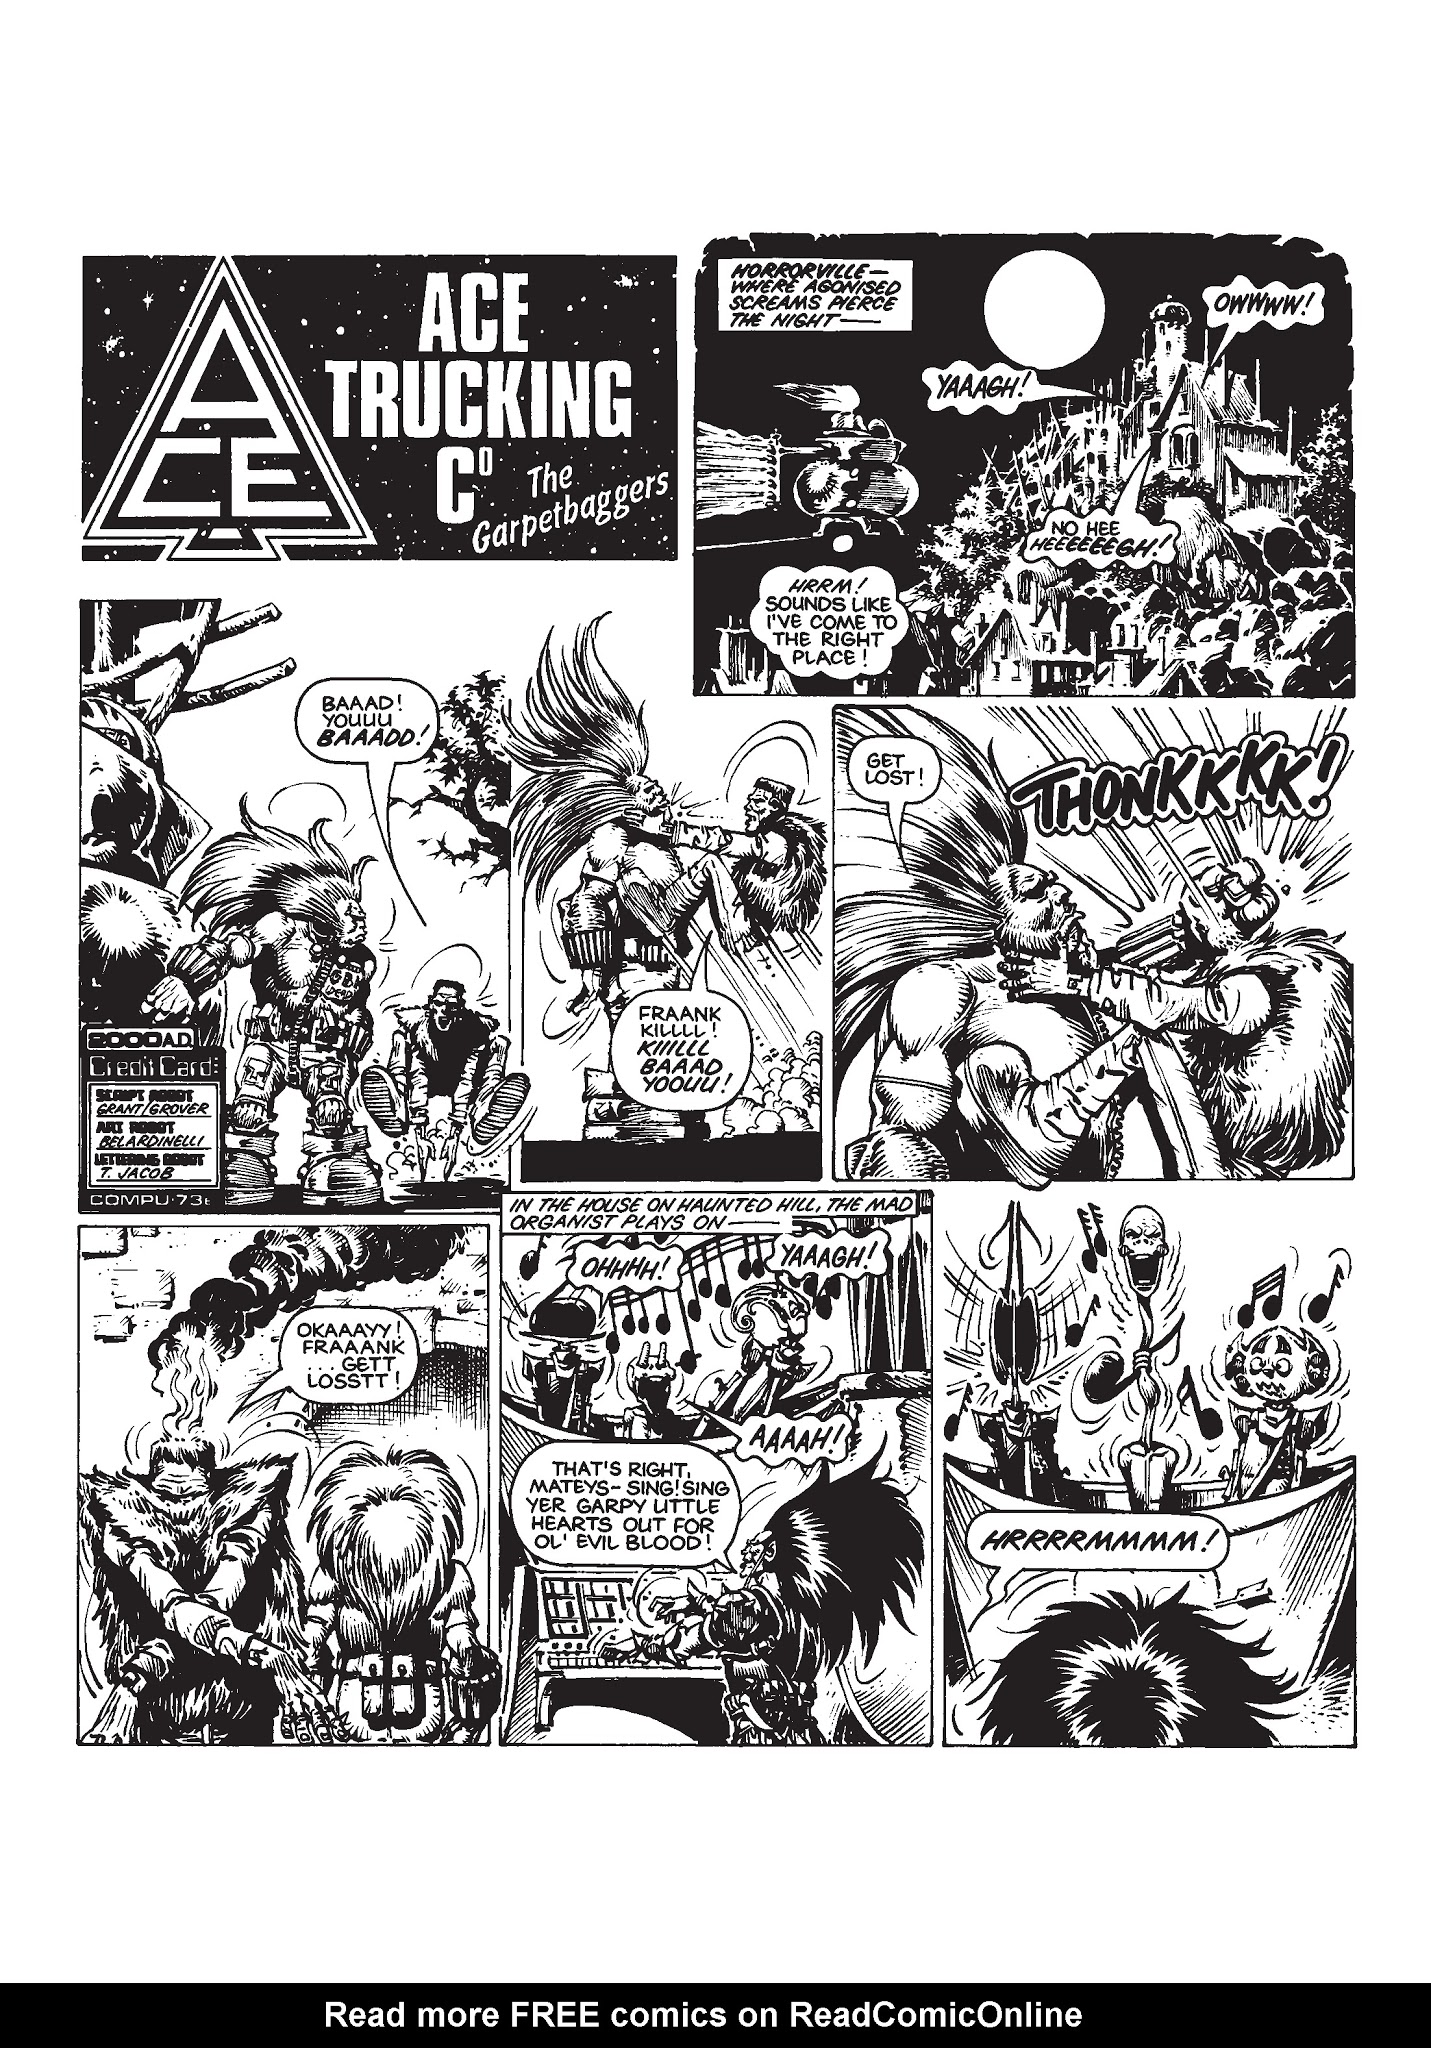 Read online The Complete Ace Trucking Co. comic -  Issue # TPB 2 - 323